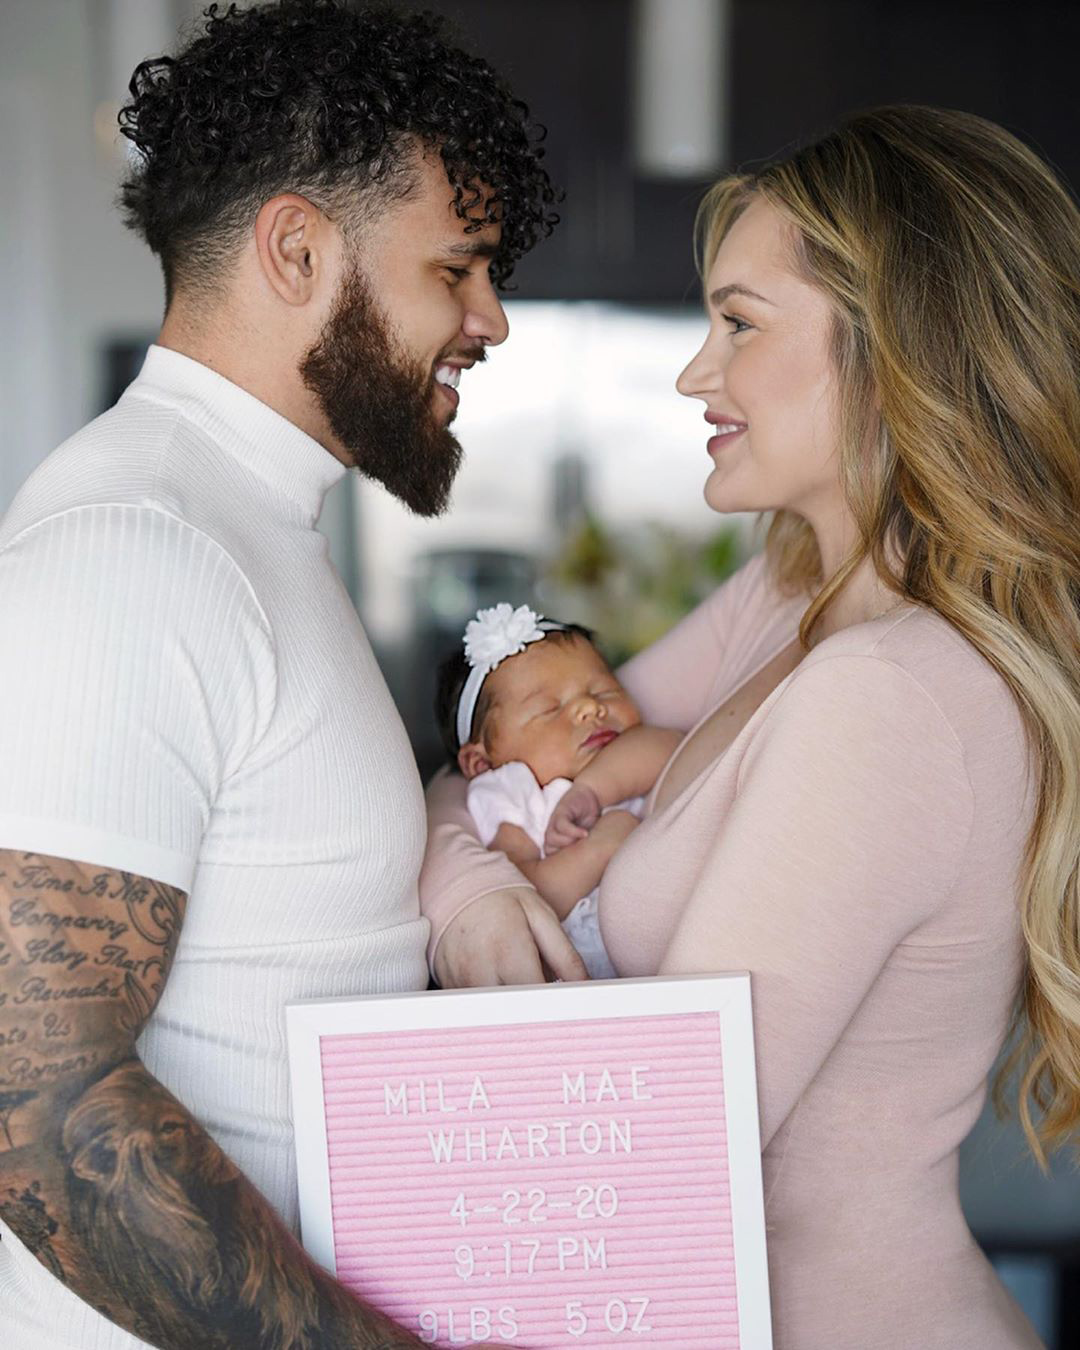 Cory Wharton, Taylor Selfridge Share Baby Photos, Delivery Details